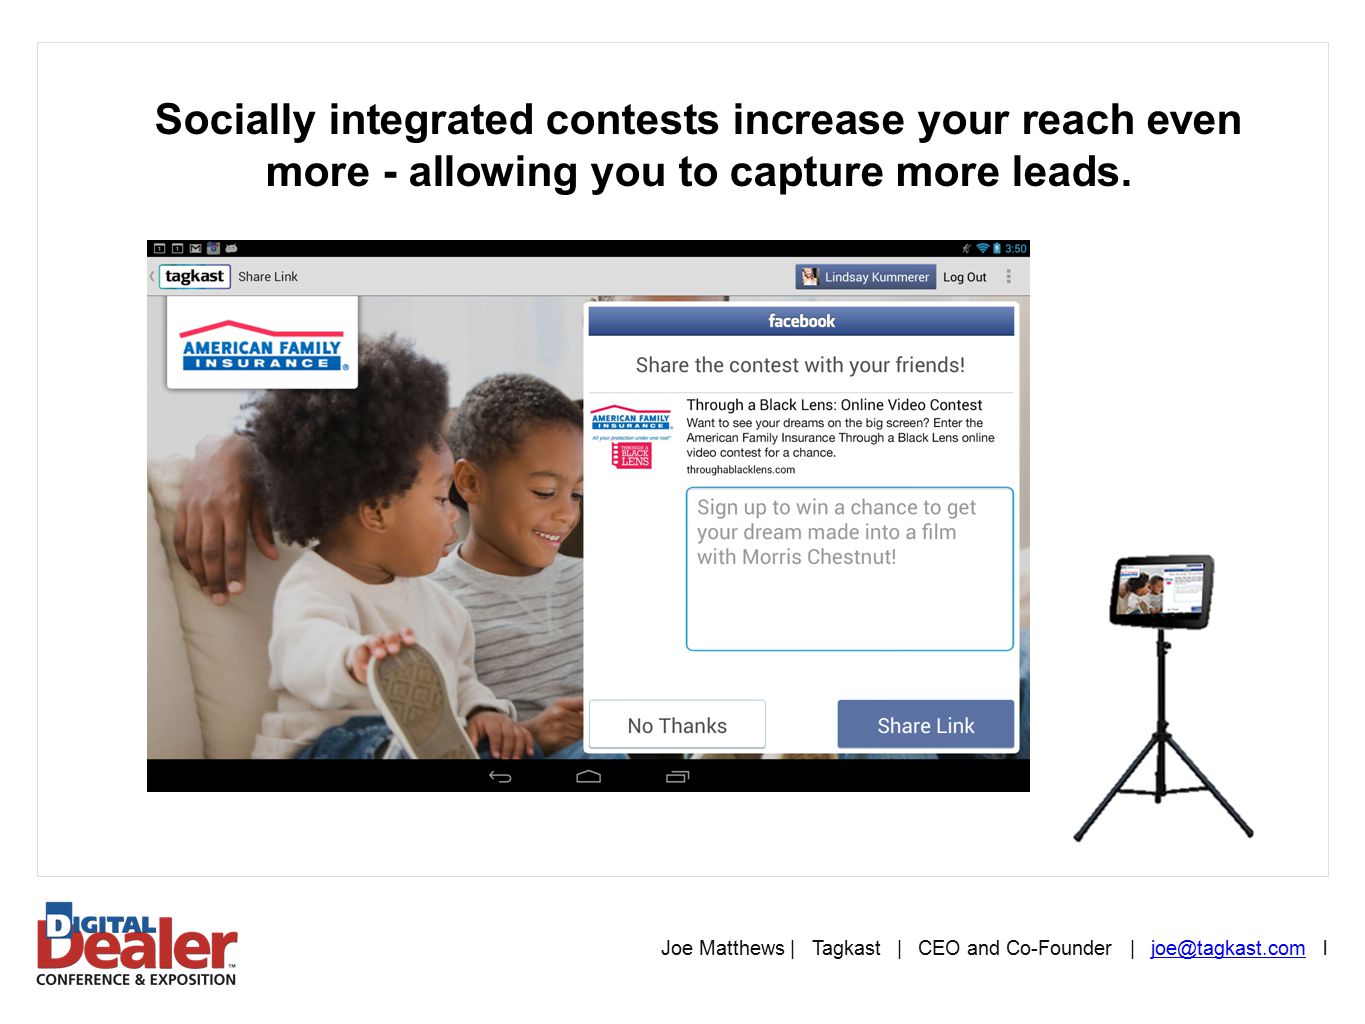 Joe Matthews | Tagkast | CEO and Co-Founder |  Socially integrated contests increase your reach even more - allowing you to capture more leads.